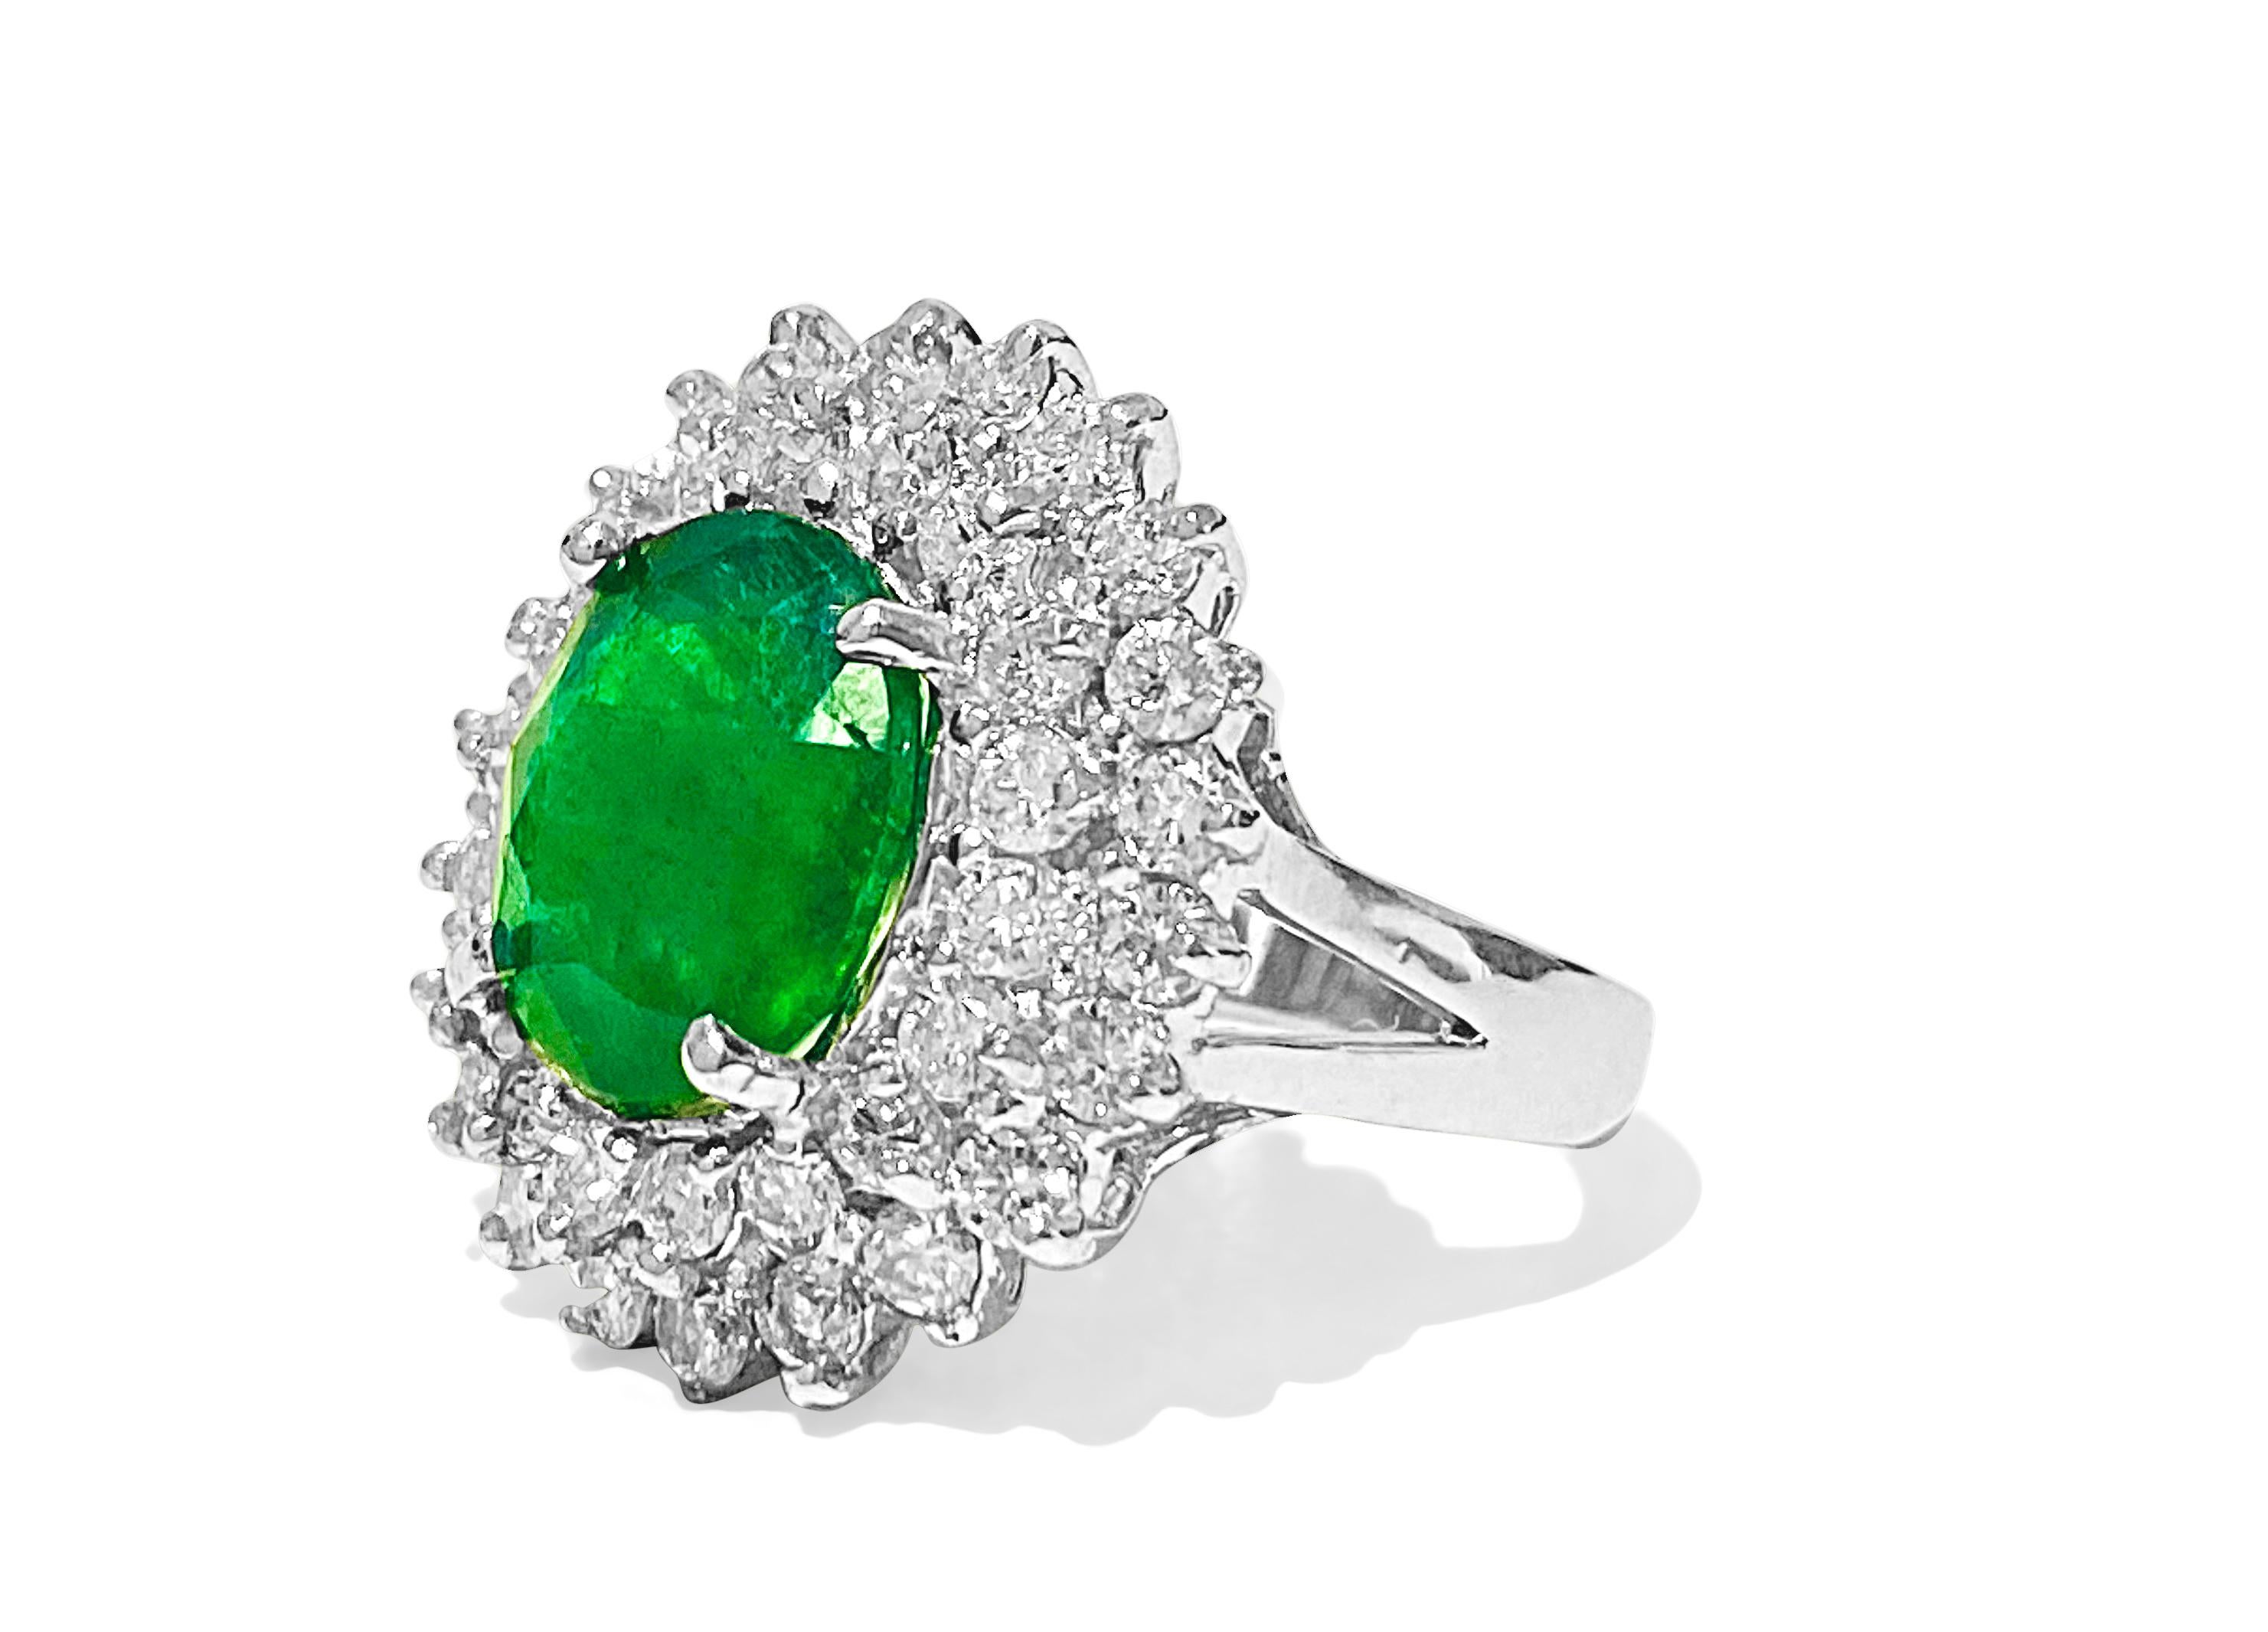 Metal: 14k white gold. 

3.05 carat emerald. 100% natural earth mined emerald. Oval shape set in prongs. 
1.50 carat diamonds, VS-SI clarity and F-G color. Round brilliant cut diamonds set in prongs. 100% natural earth mined and genuine diamonds.